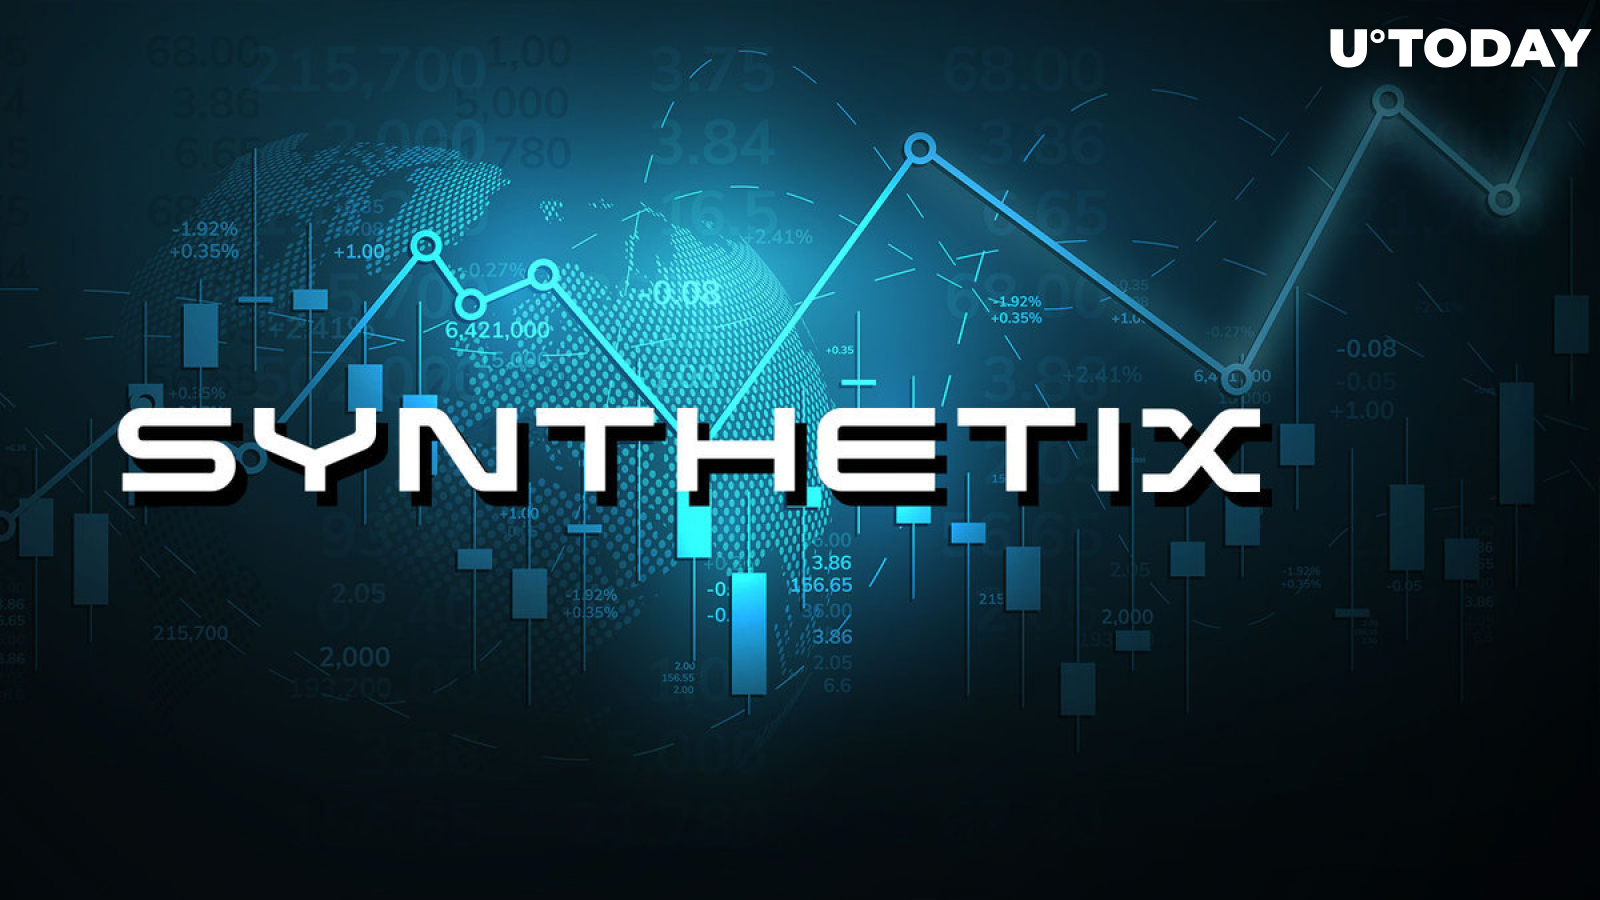 Synthetix (SNX) Price Jumps 15% in Response to New DeFi Investor Embrace